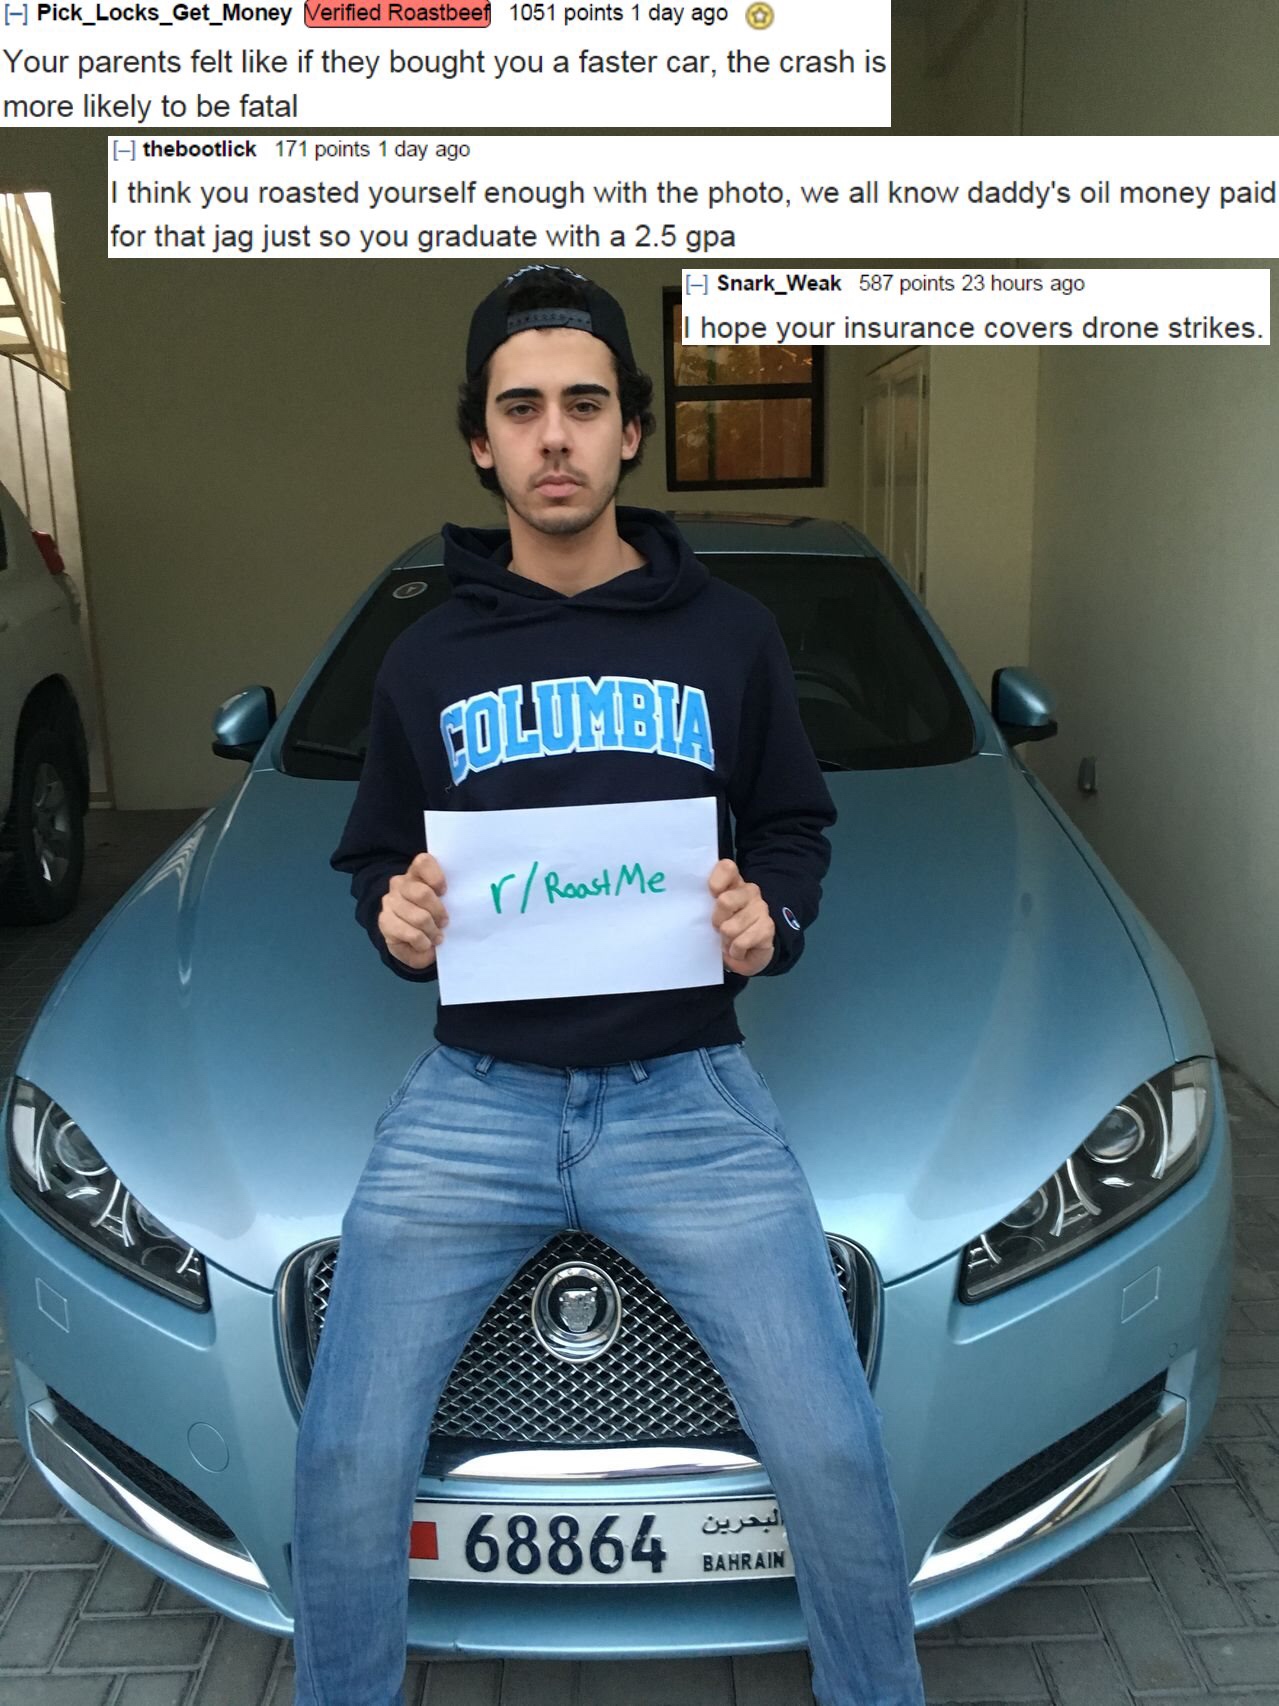 r roastme - Pick_Locks_et_Money Ward 105 points 1 day ago Your parents felt if they bought you a faster car, the crash is more ly to be fatal F ick poday think you foasted yourself enough with the photo, we all know daddy's of money paid for that jag just